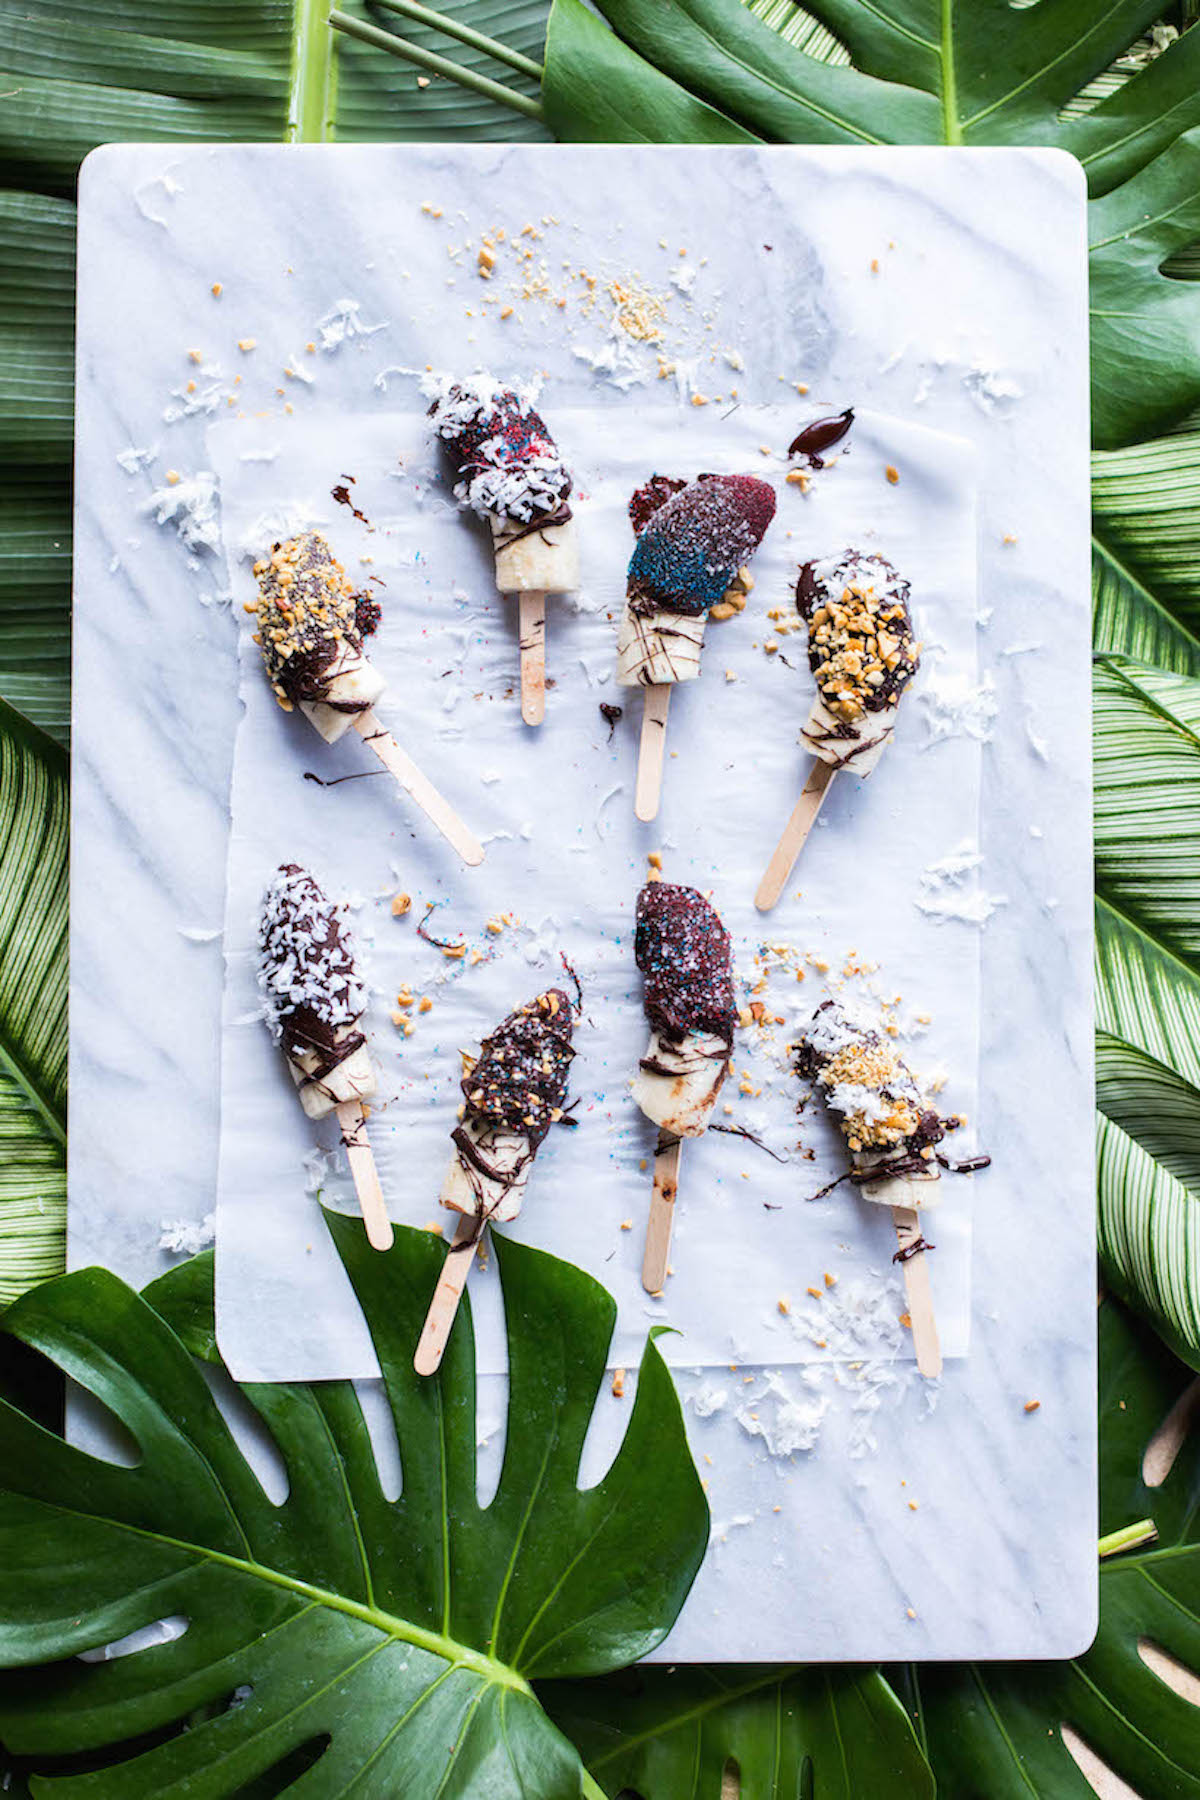 @pfairytale Chocolate Dipped Banana Popsicles